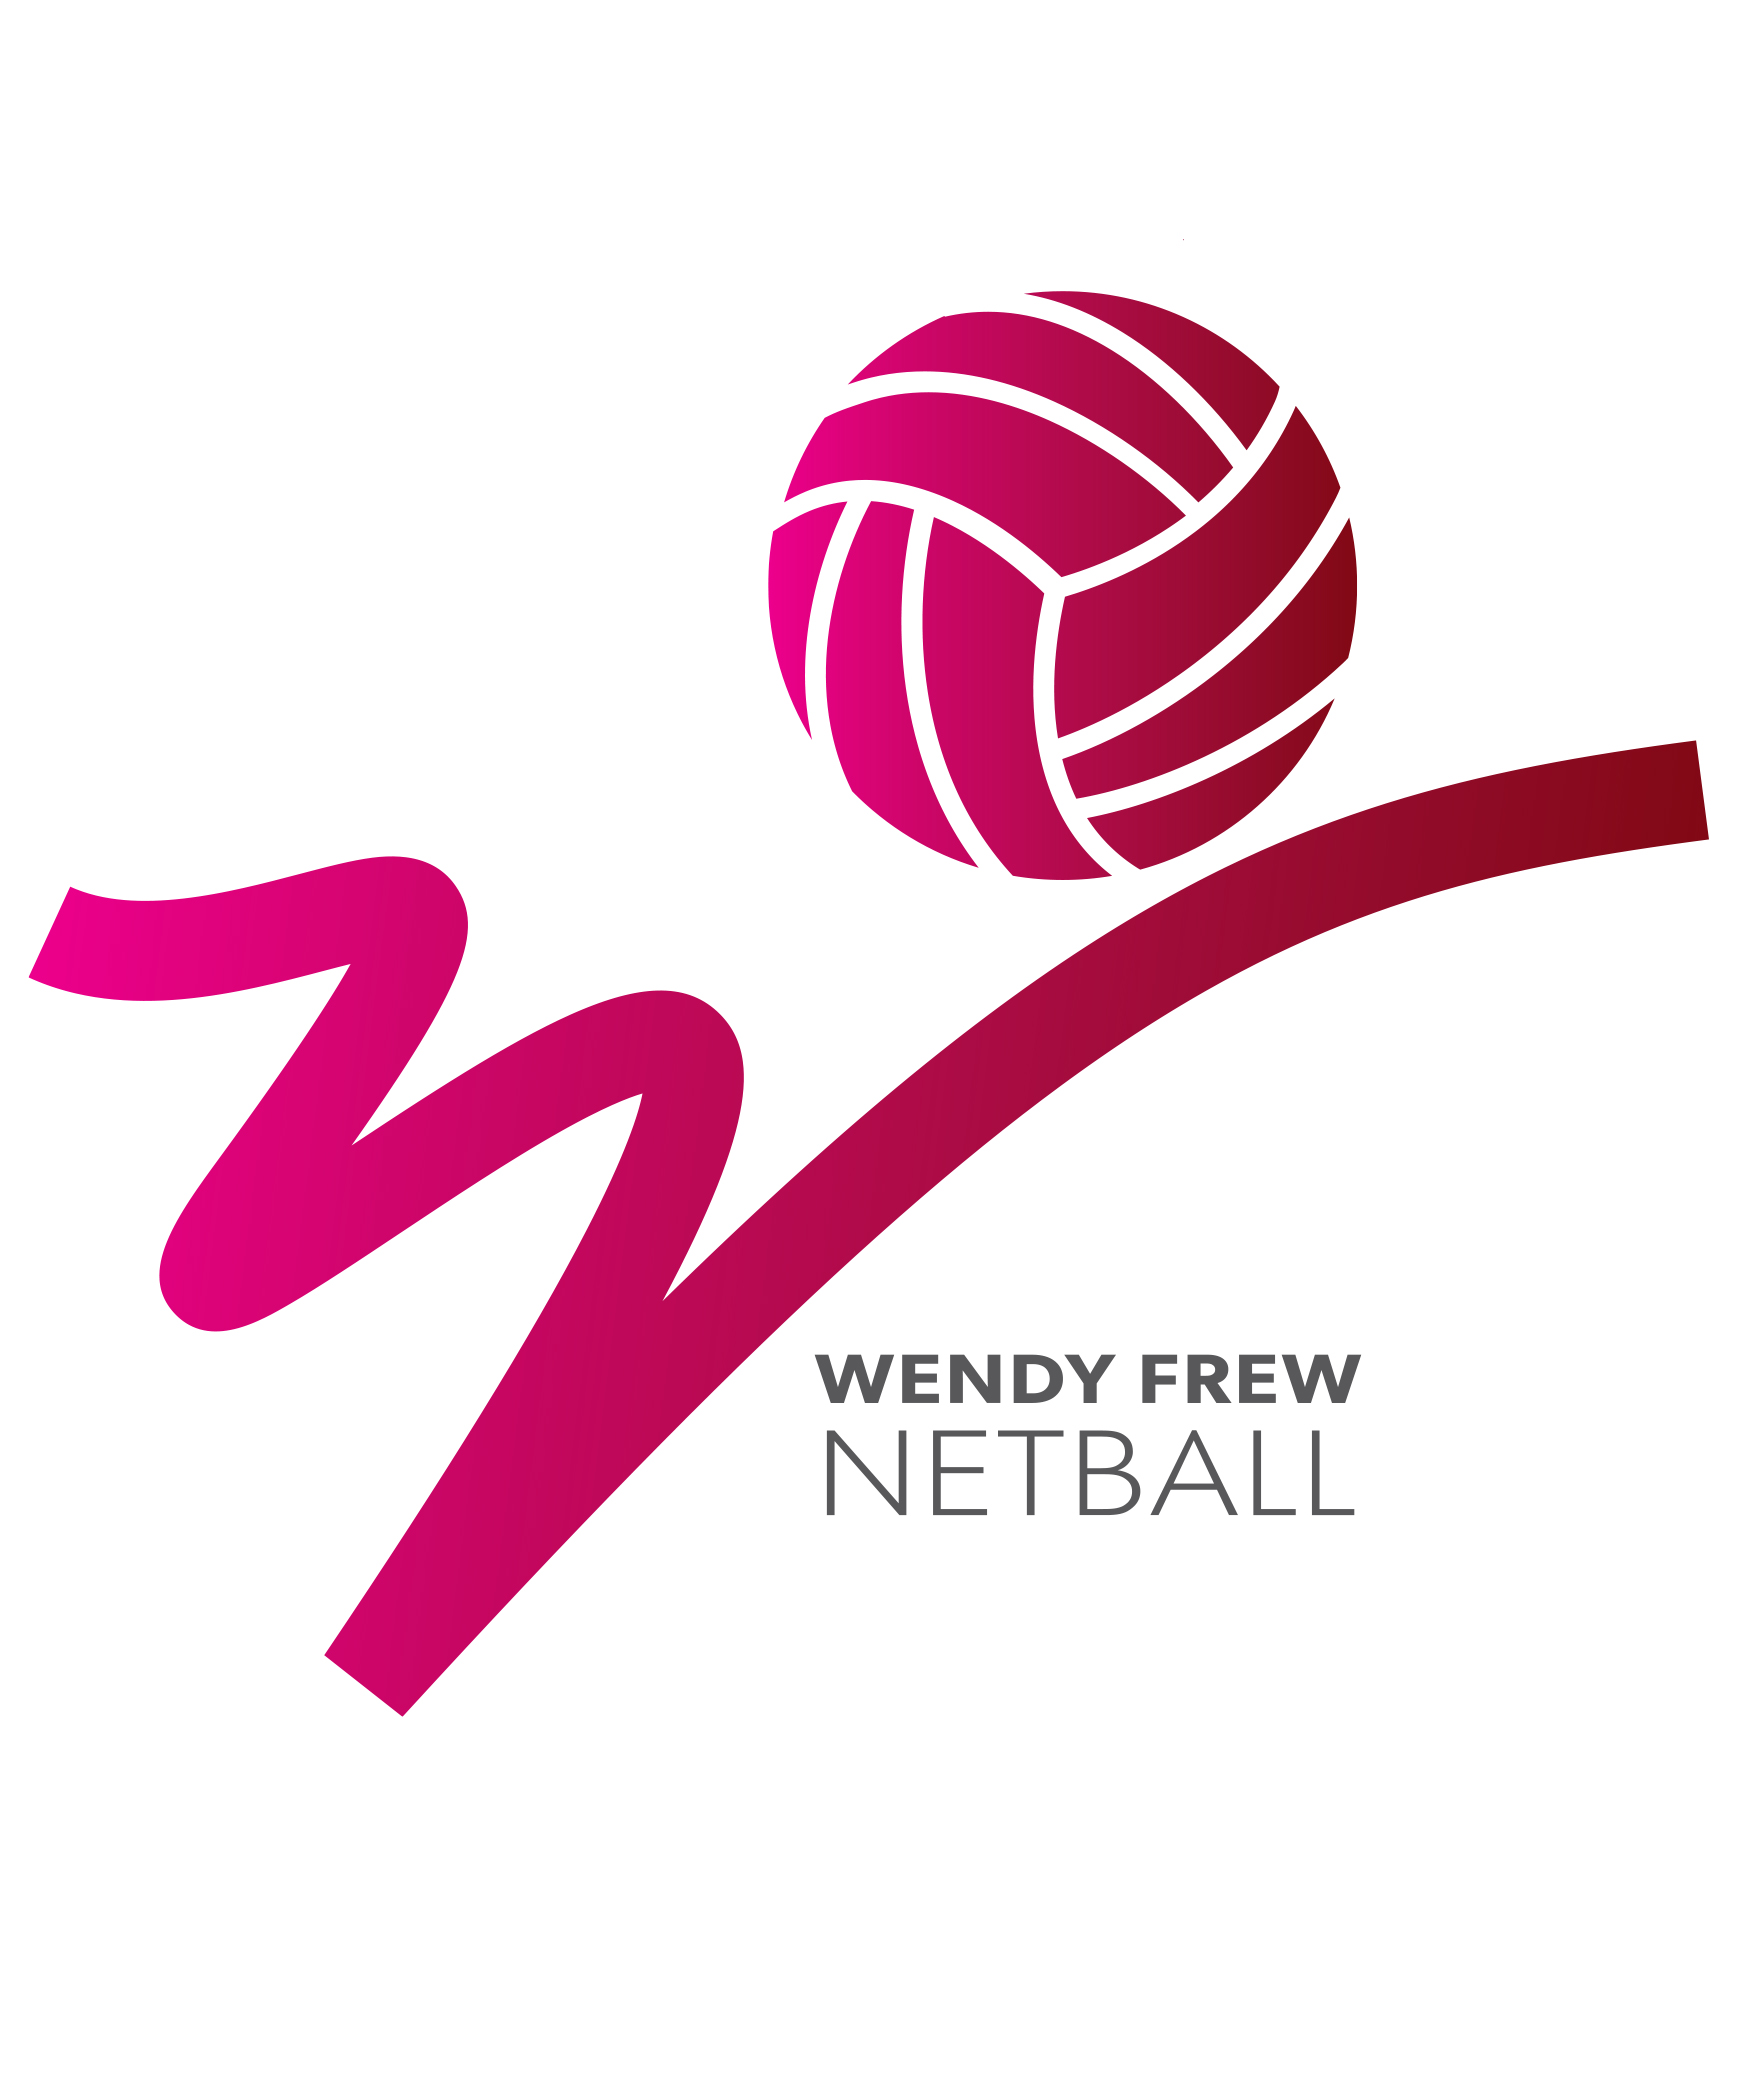 Wendy Frew Netball  logo design by logo designer Yellow Pencil Brand Sharpening for your inspiration and for the worlds largest logo competition